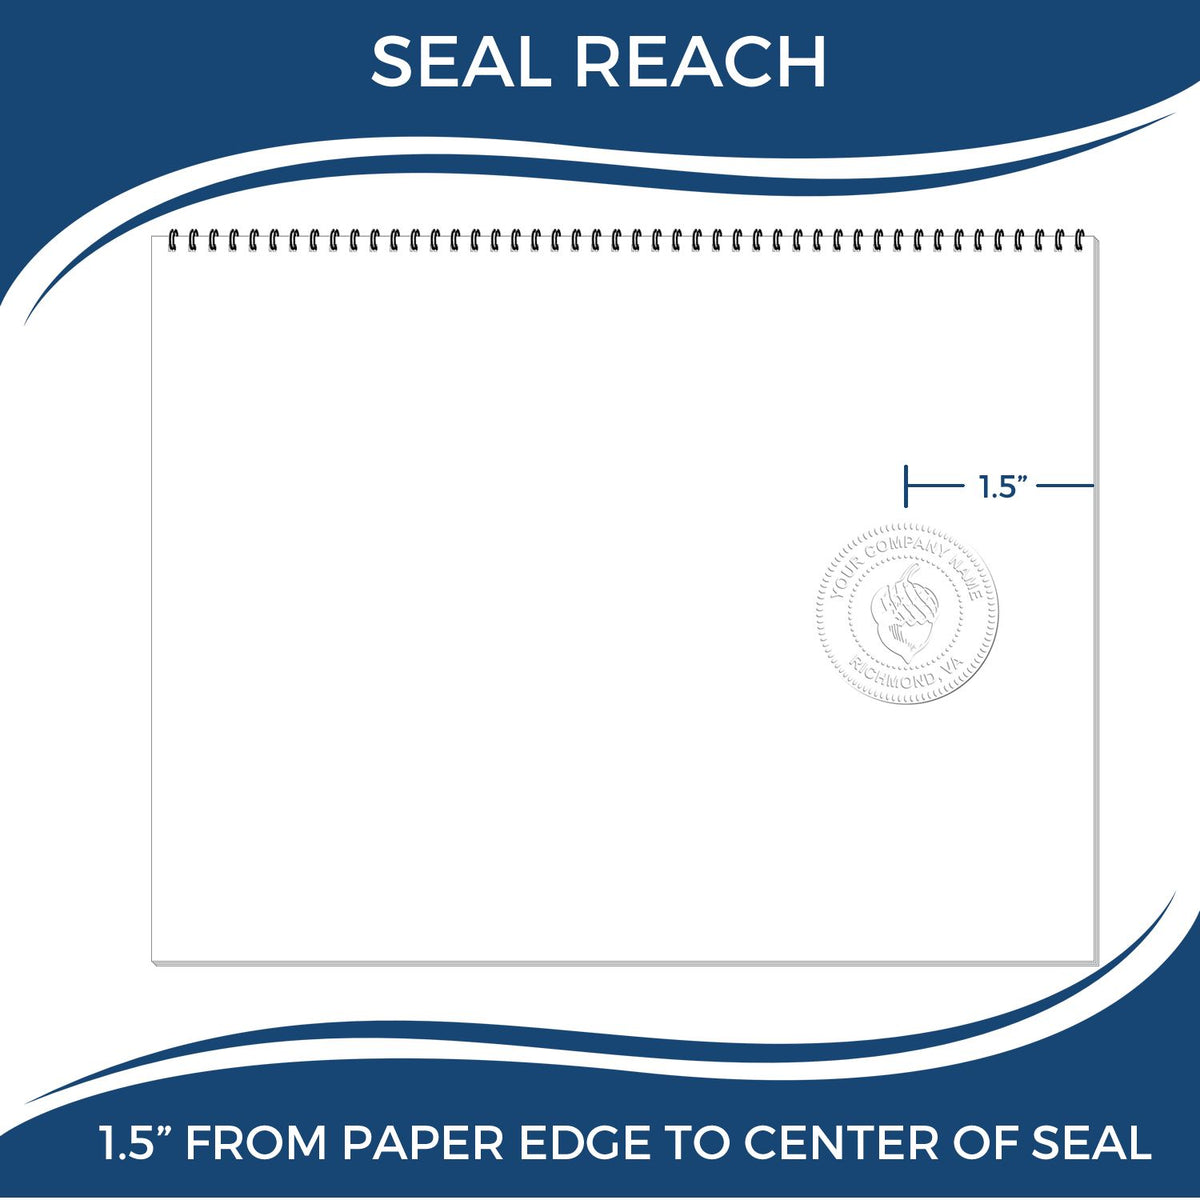 An infographic showing the seal reach which is represented by a ruler and a miniature seal image of the Hybrid Guam Land Surveyor Seal